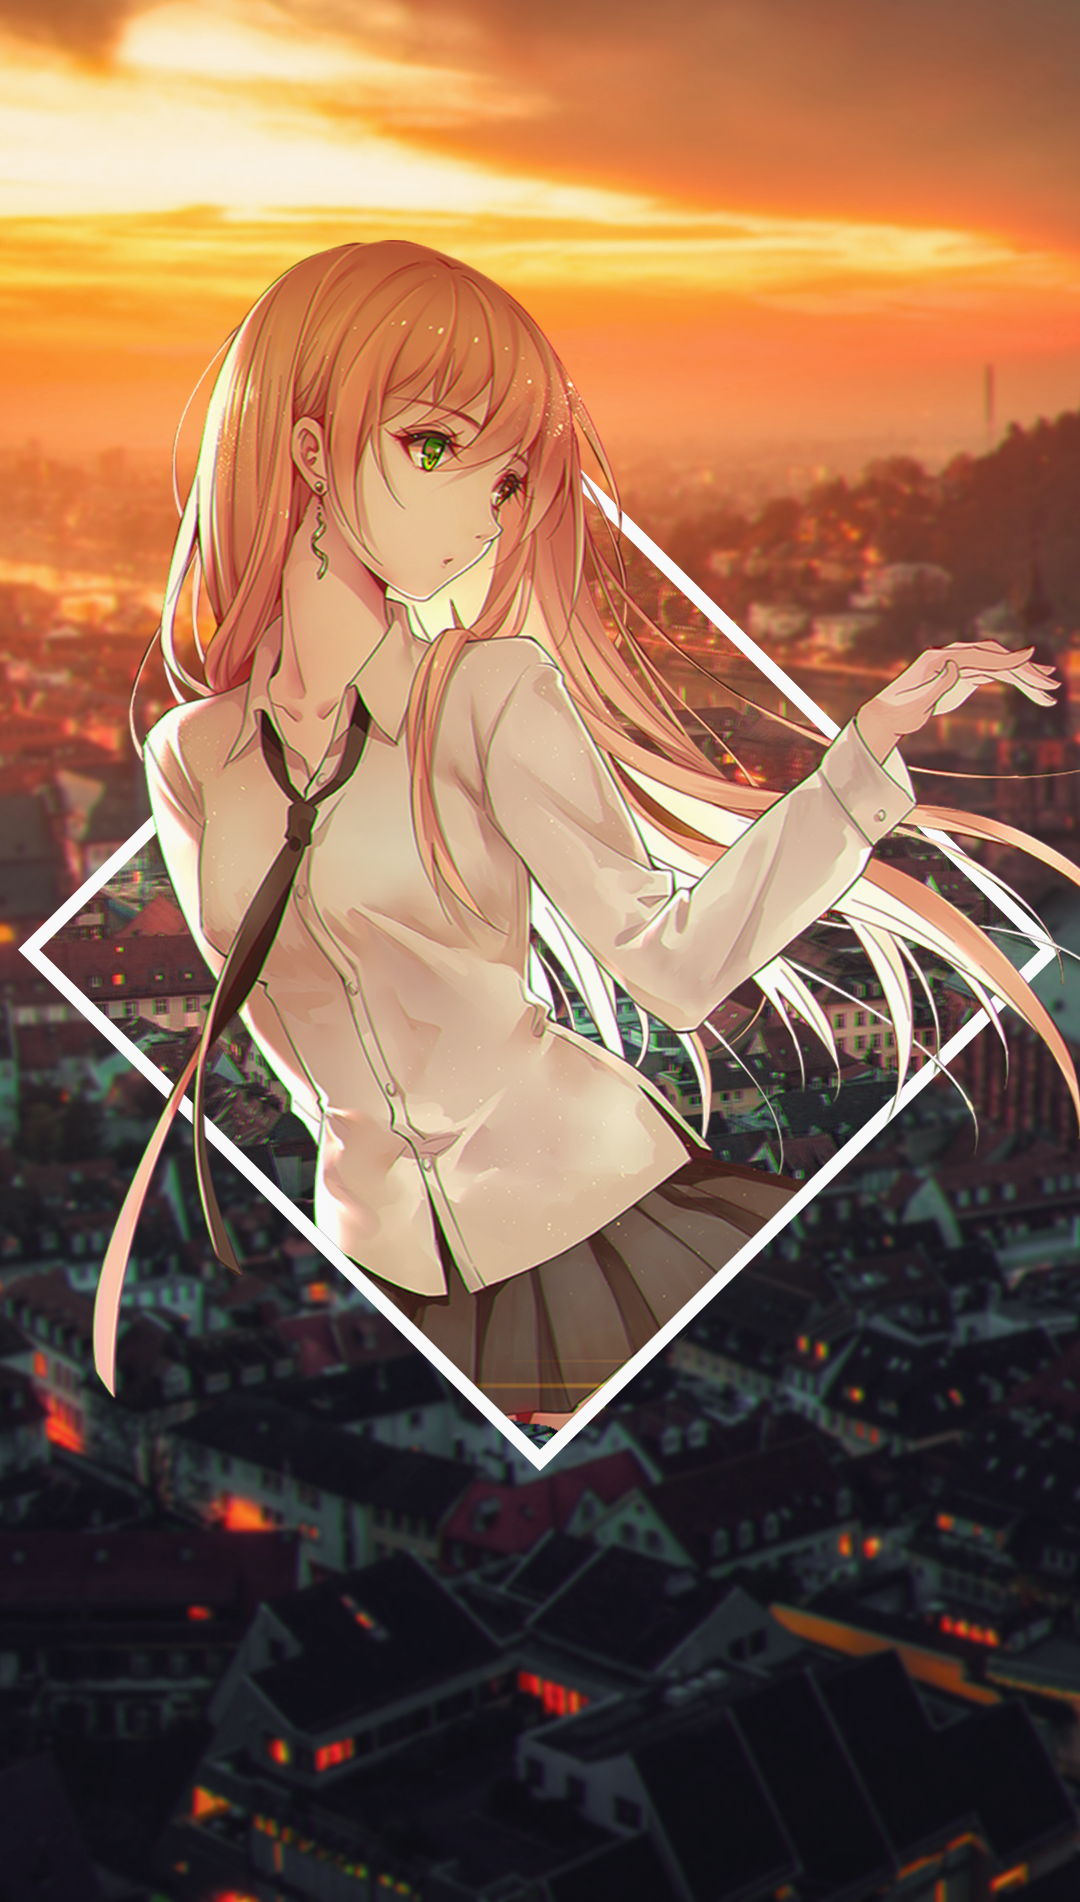 Anime 1080x1902 anime anime girls picture-in-picture city